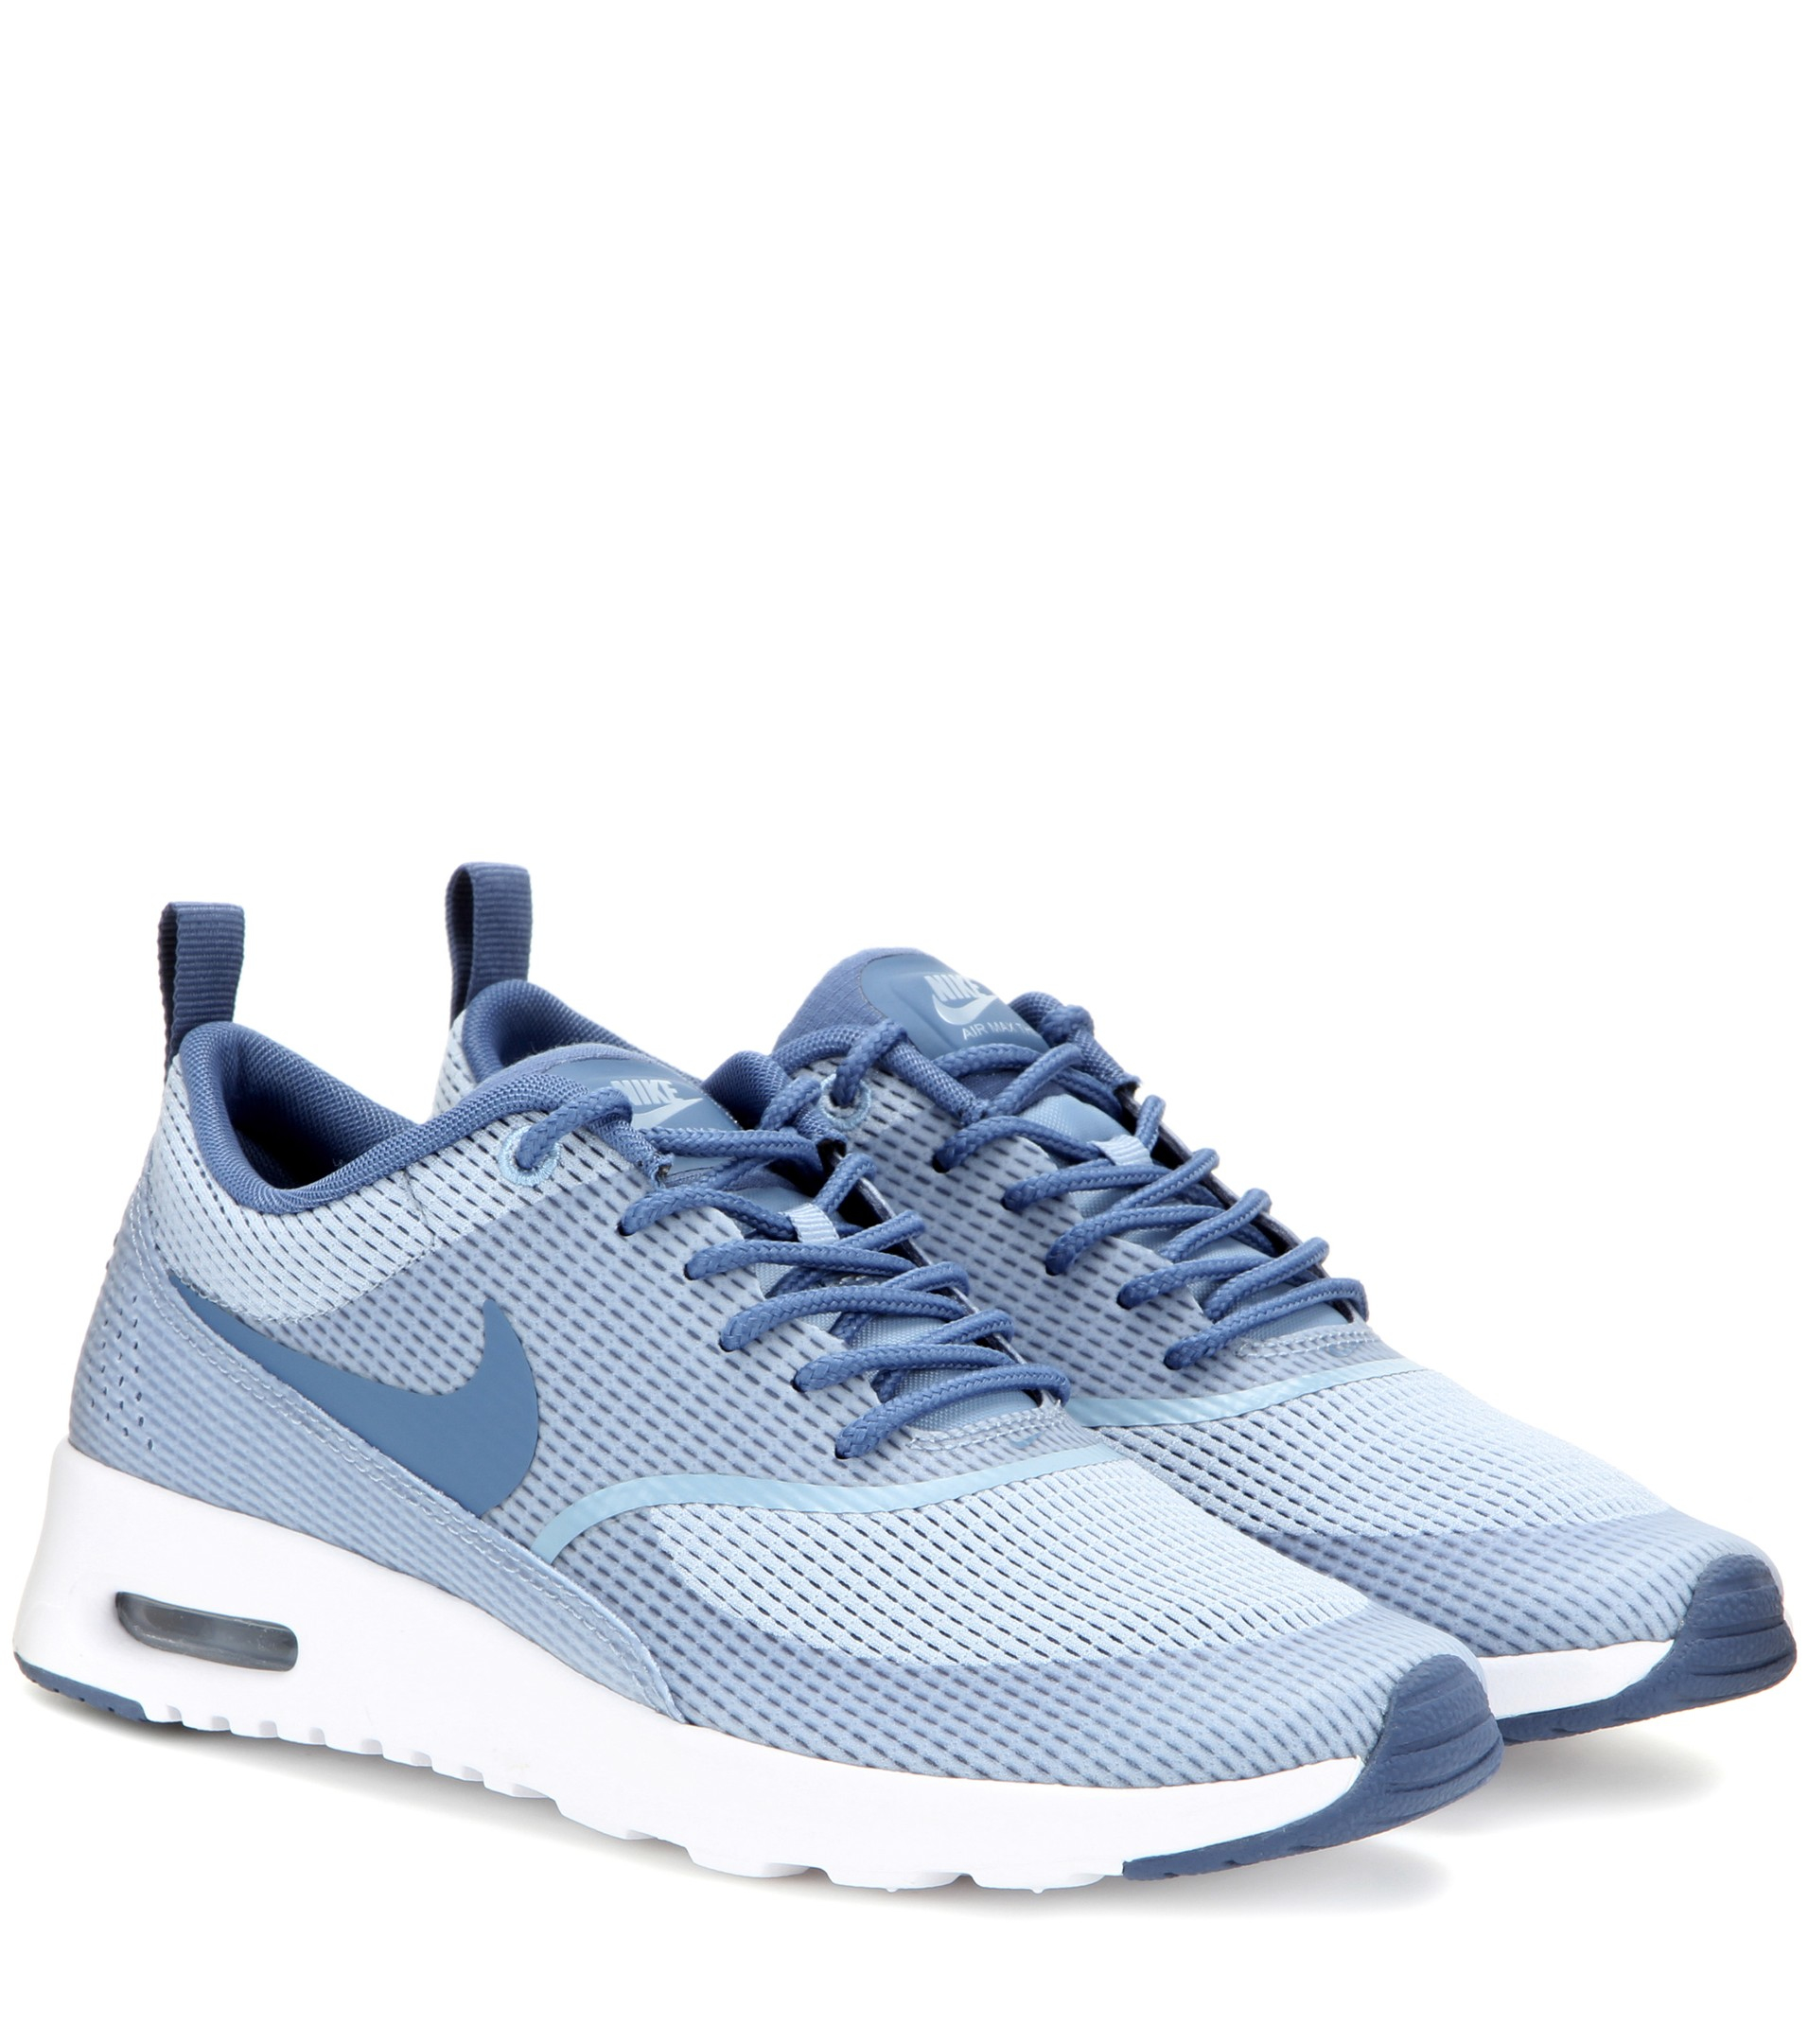 Nike Air Max Thea Txt Sneakers in Blue 